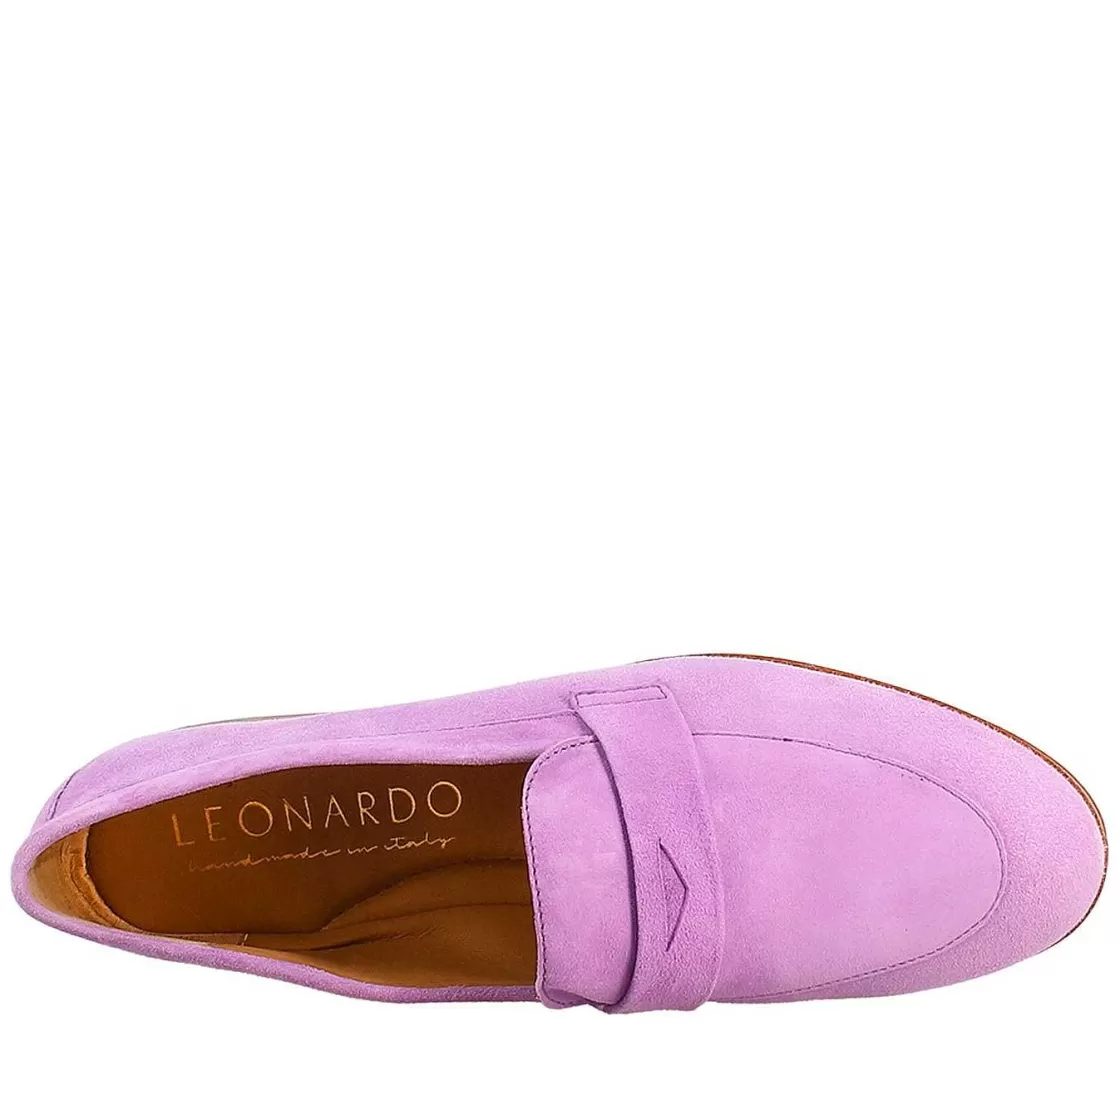 Leonardo Woman'S Bag Moccasin In Lilac Suede Clearance